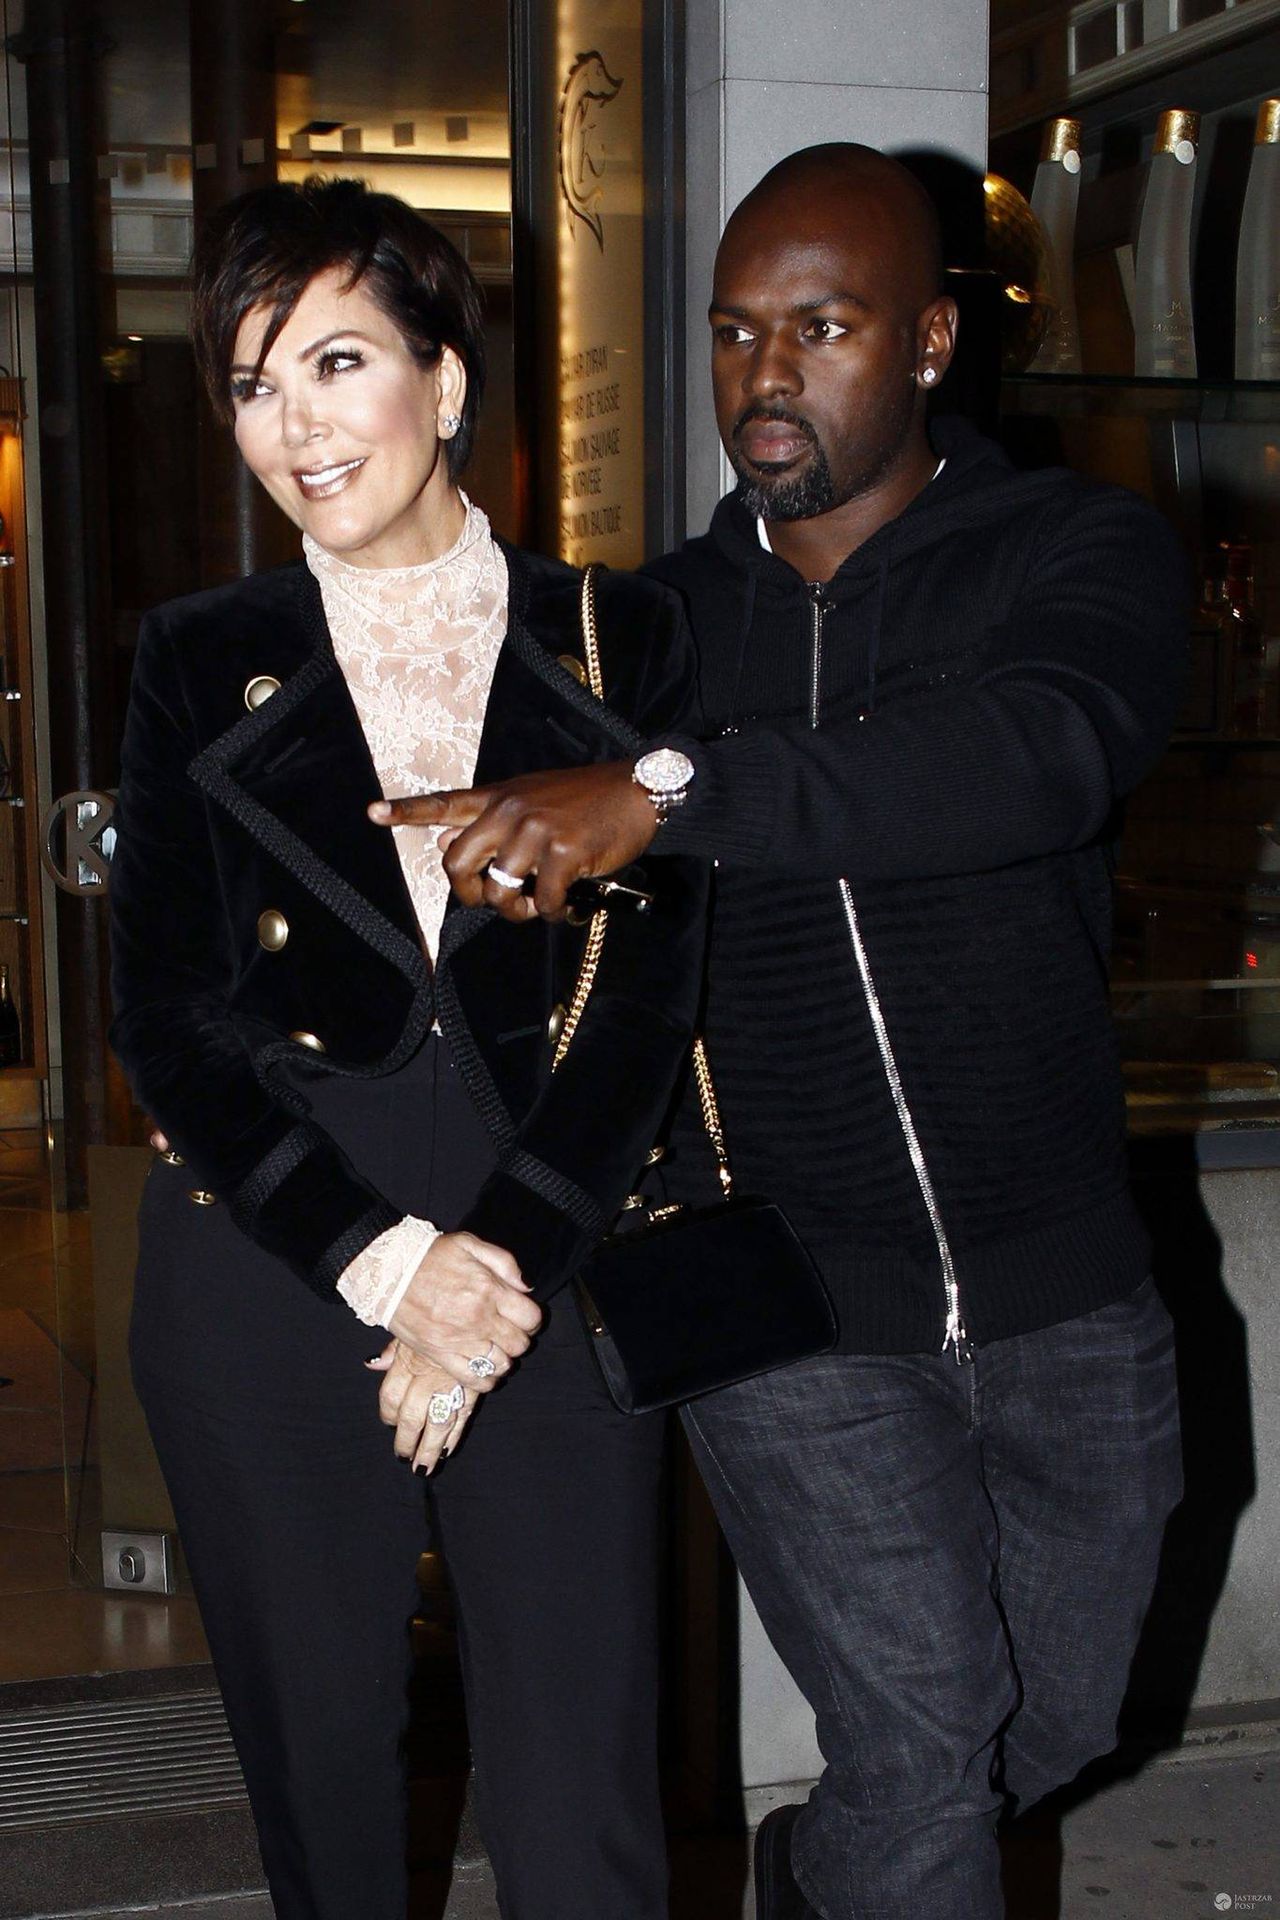 157612, Kris Jenner seen out and about with boy toy Corey Gamble as the couple have dinner at popular French restaurant Caviar Kaspia. Paris, France - Monday September 26, 2016. FRANCE OUT Photograph: © Ralph, PacificCoastNews. Los Angeles Office (PCN): +1 310.822.0419 UK Office (Photoshot): +44 (0) 20 7421 6000